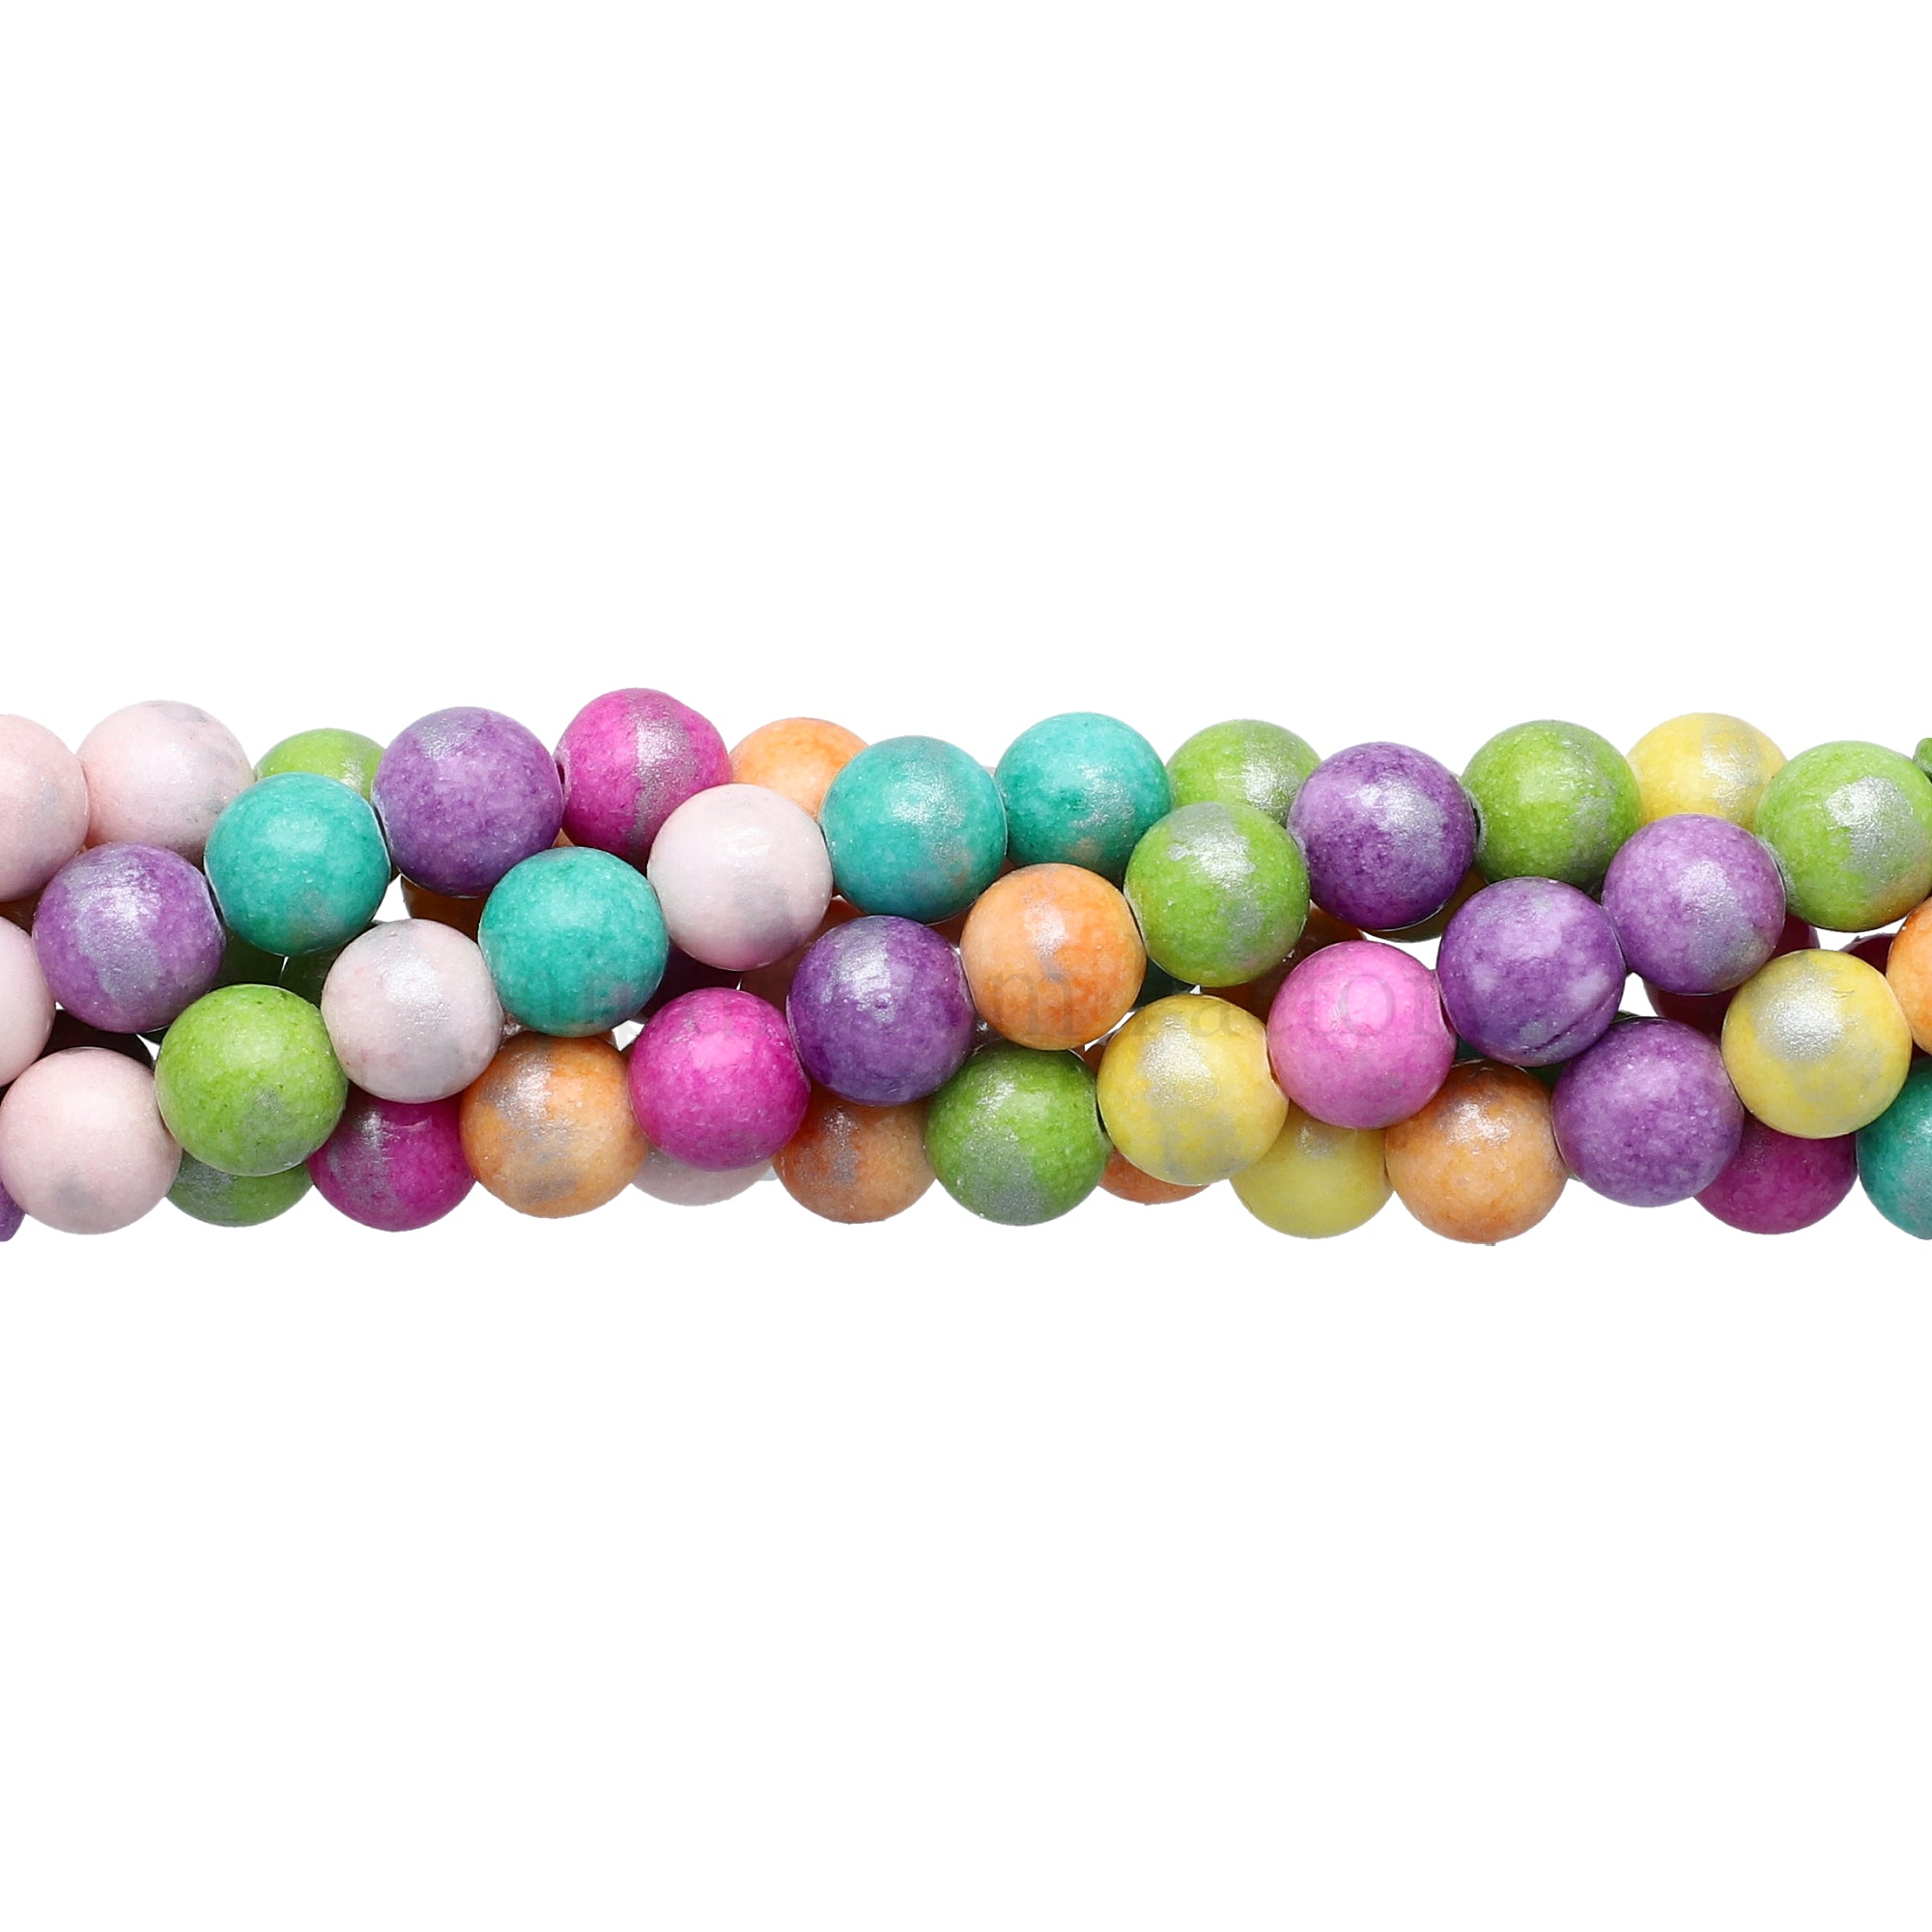 8 MM Multi Mix Color Silver Leafed Jade Smooth Round Beads 15 Inches Strand